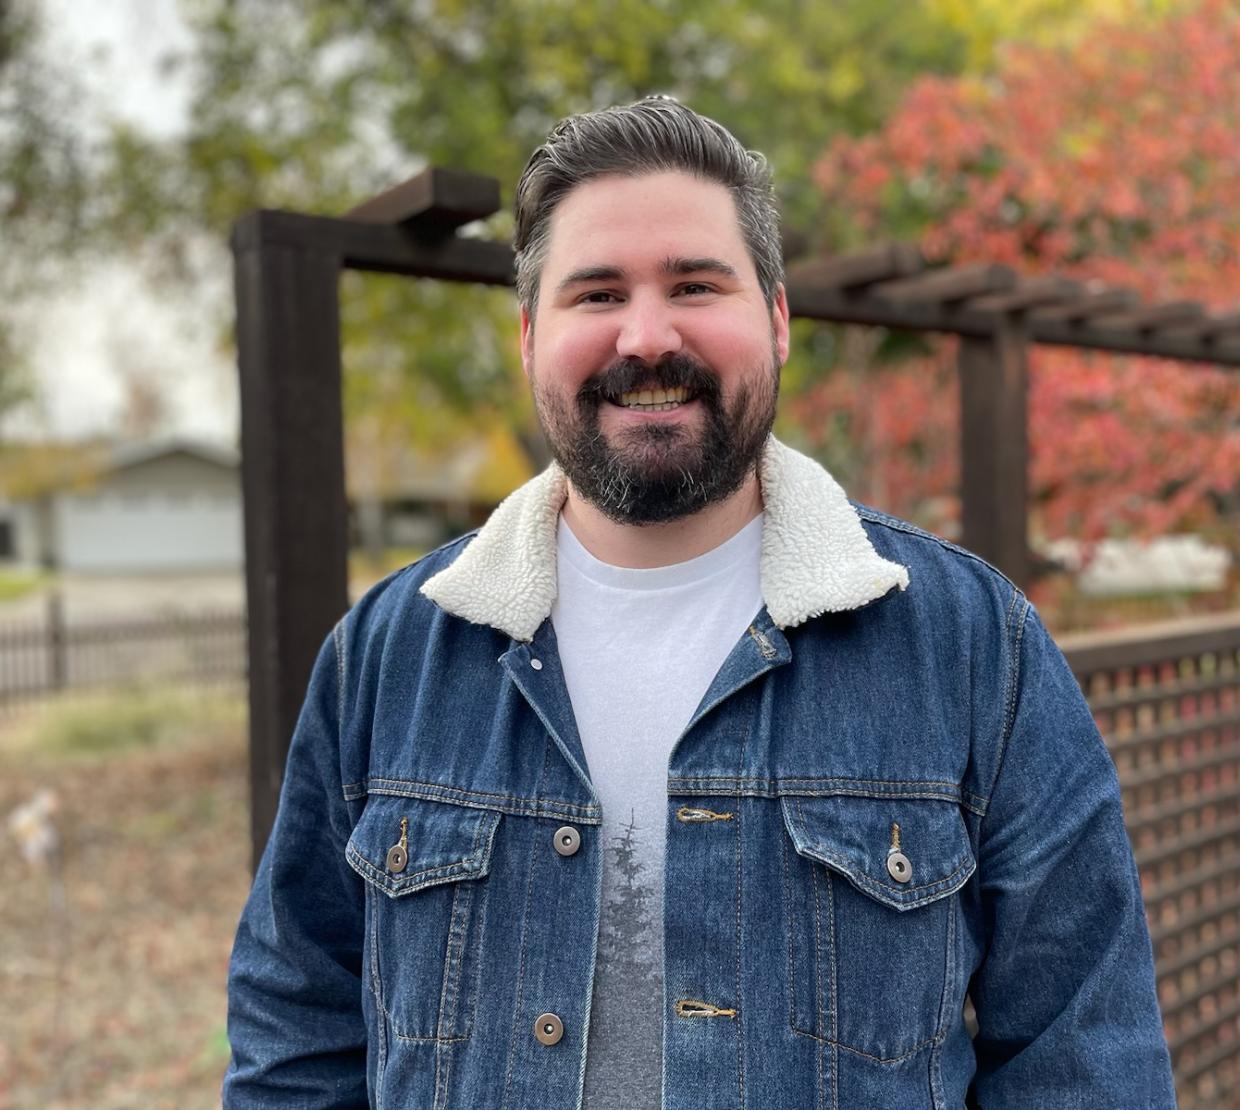 A man with a beard stands in a denim jacket with autumn colored trees in the background.